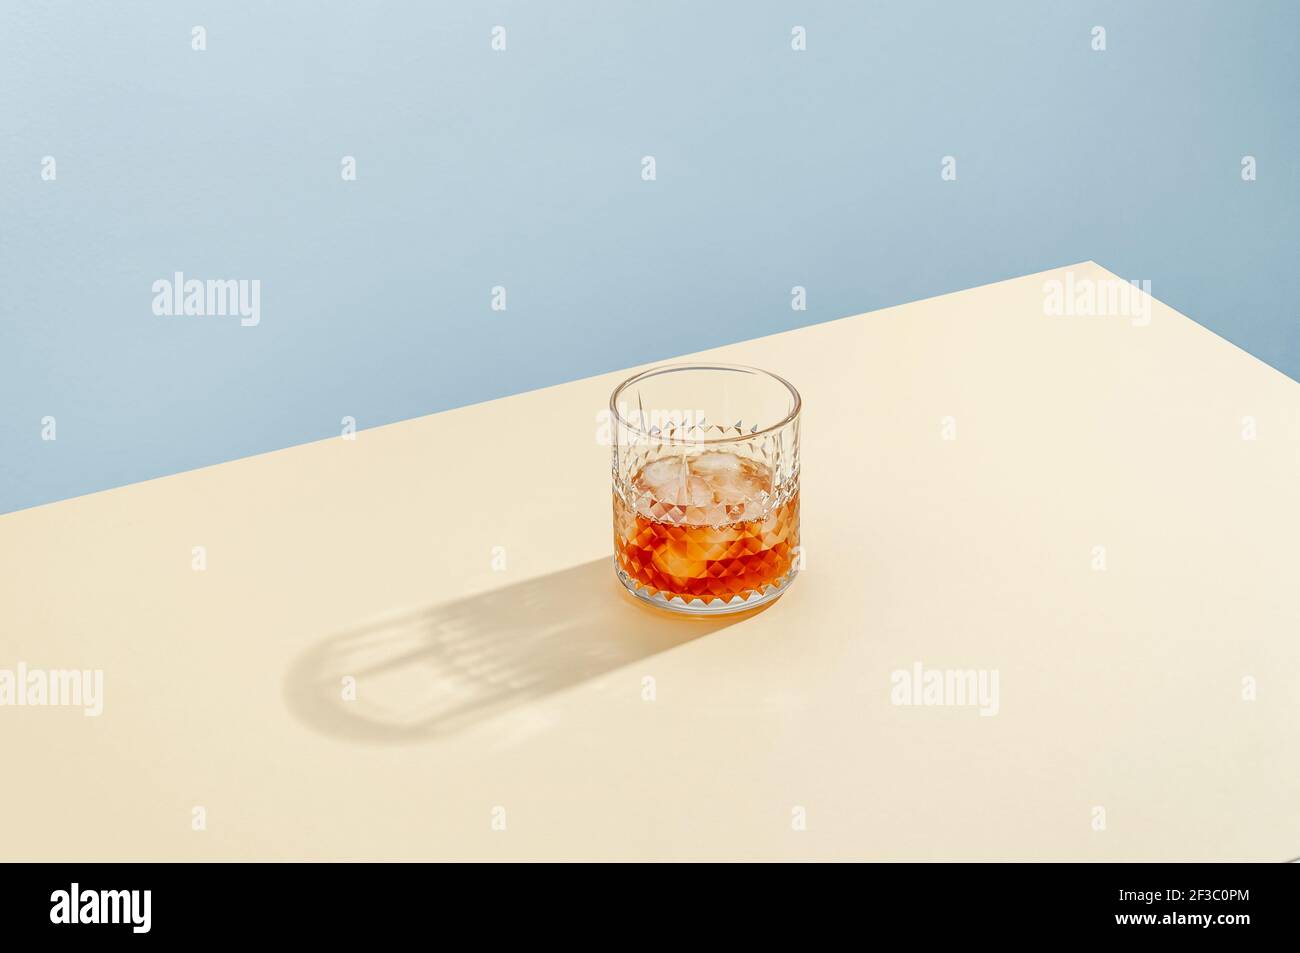 Glass with Whiskey and Ice Cube on Table on Blue Background. Modern Isometric Style. Creative Concept. Stock Photo